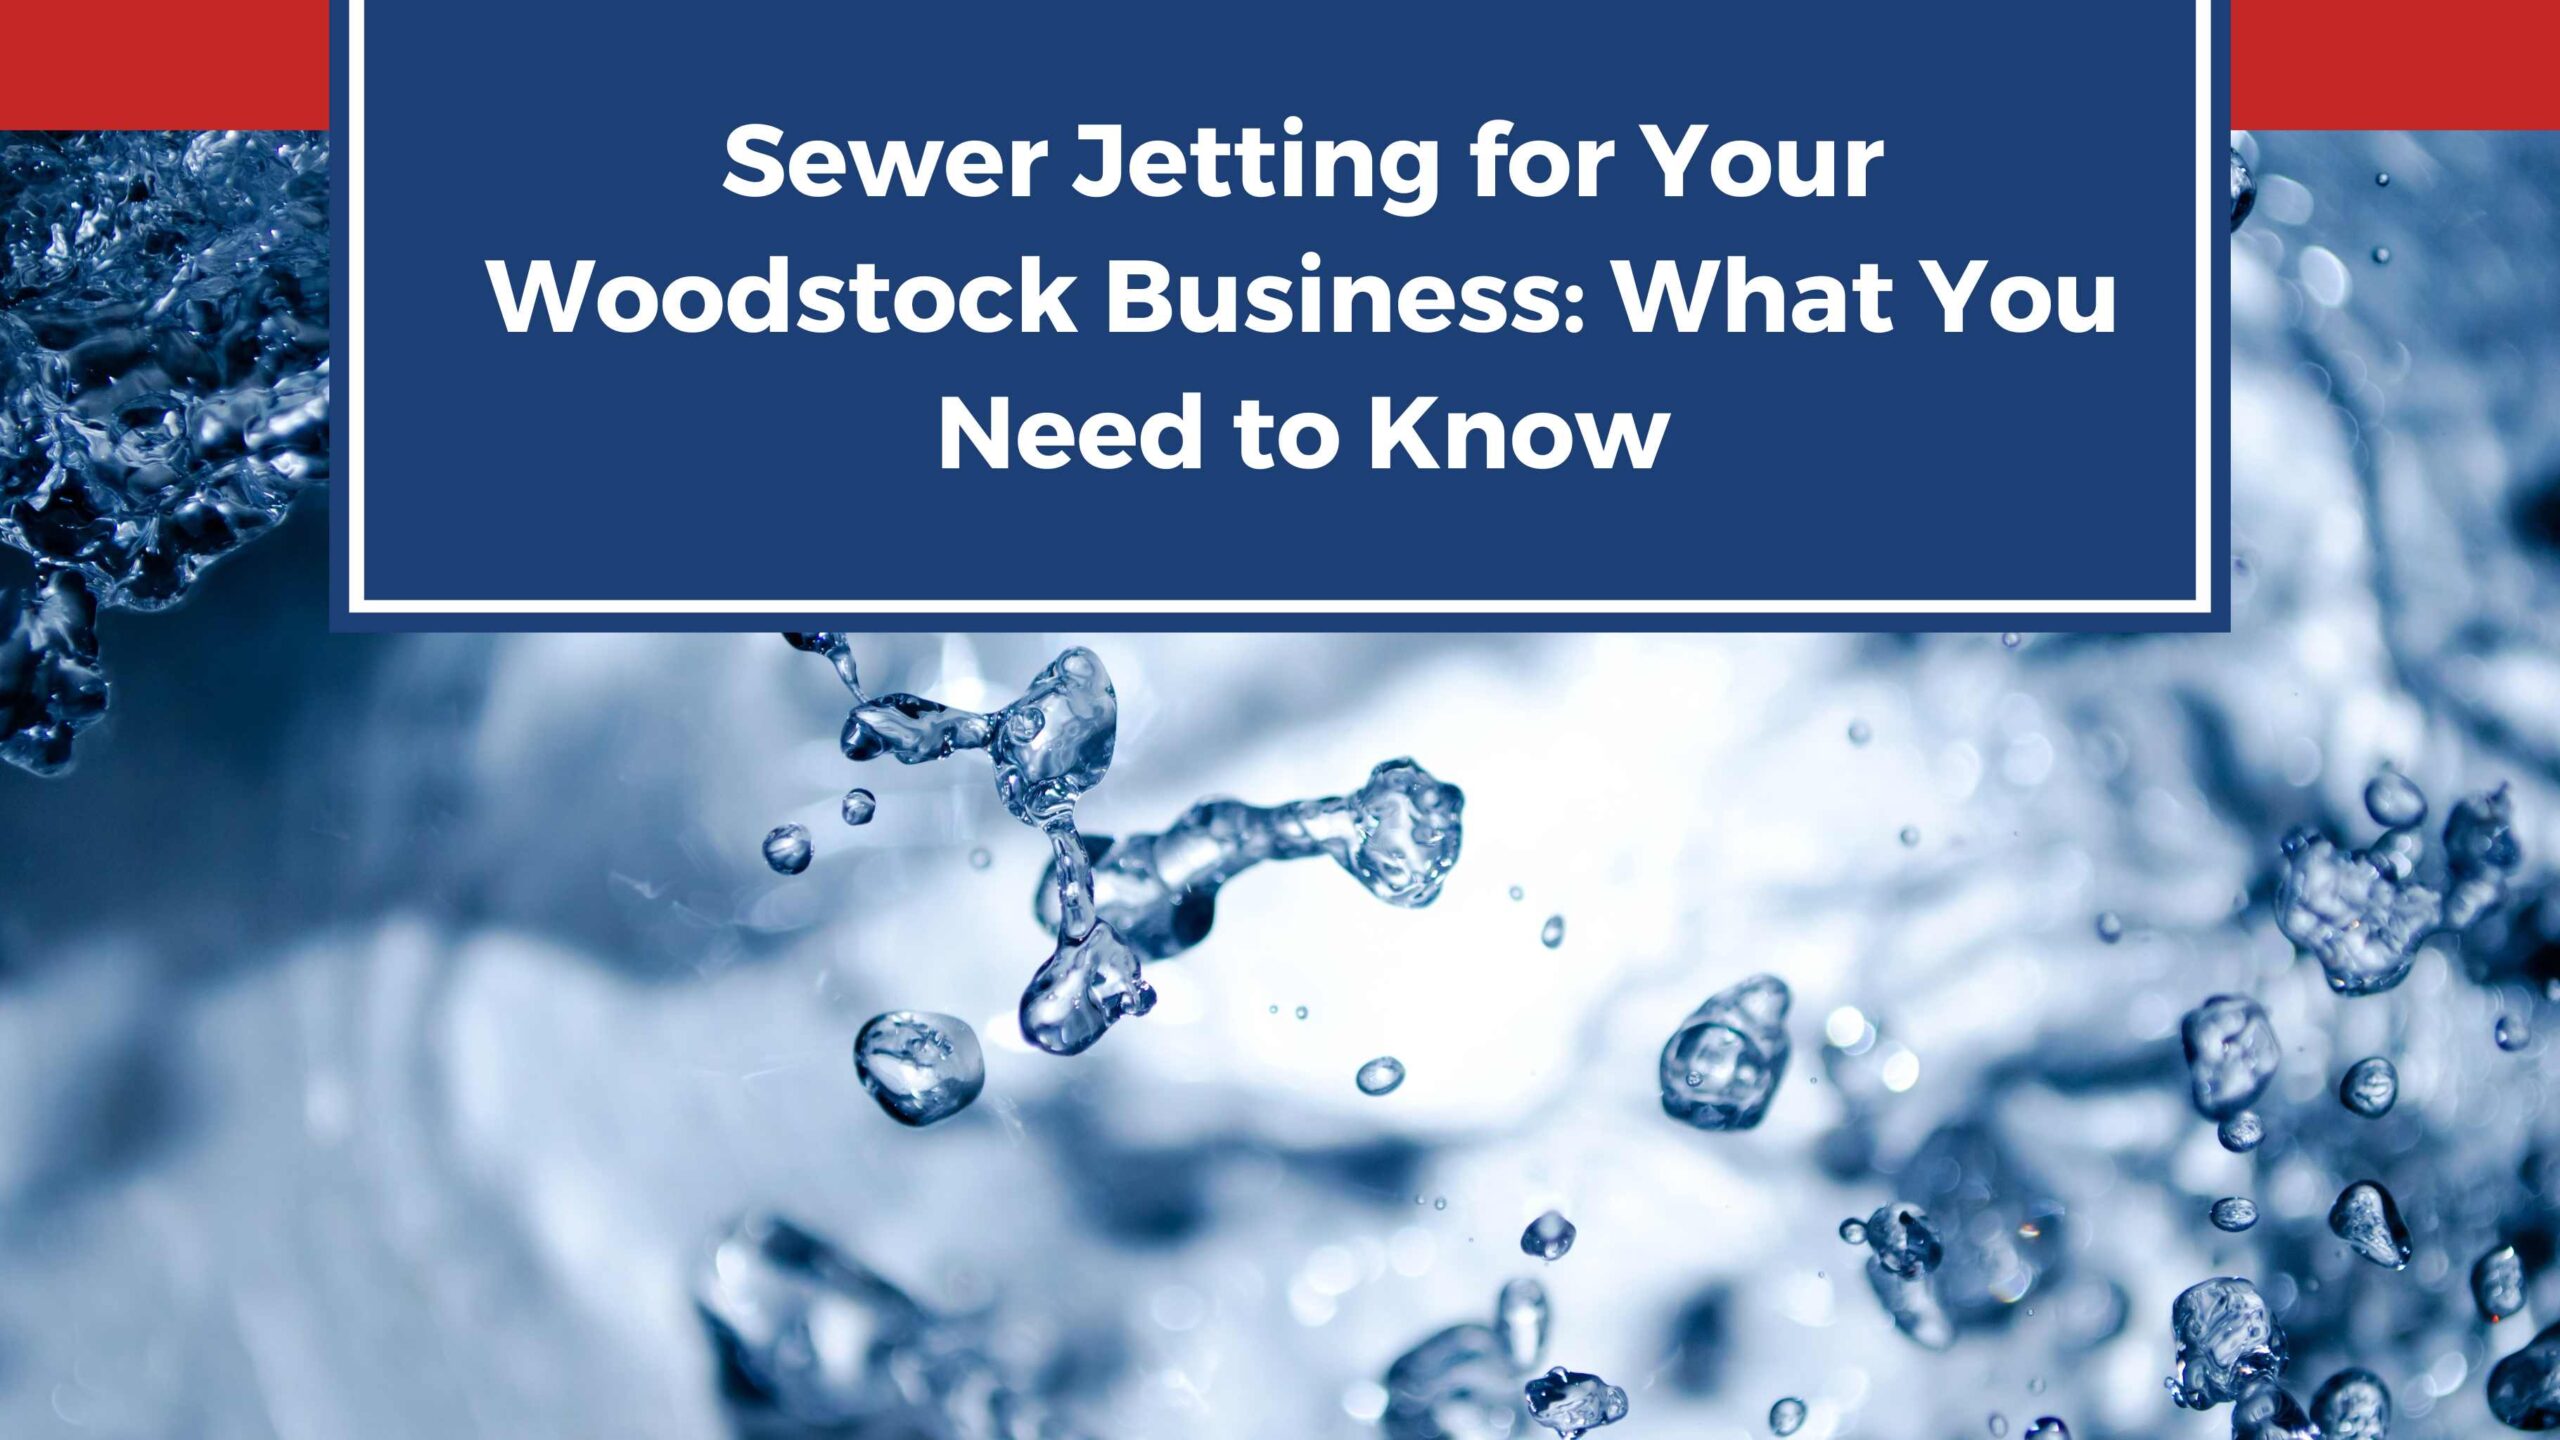 Sewer Jetting for Your Woodstock Business What You Need to Know